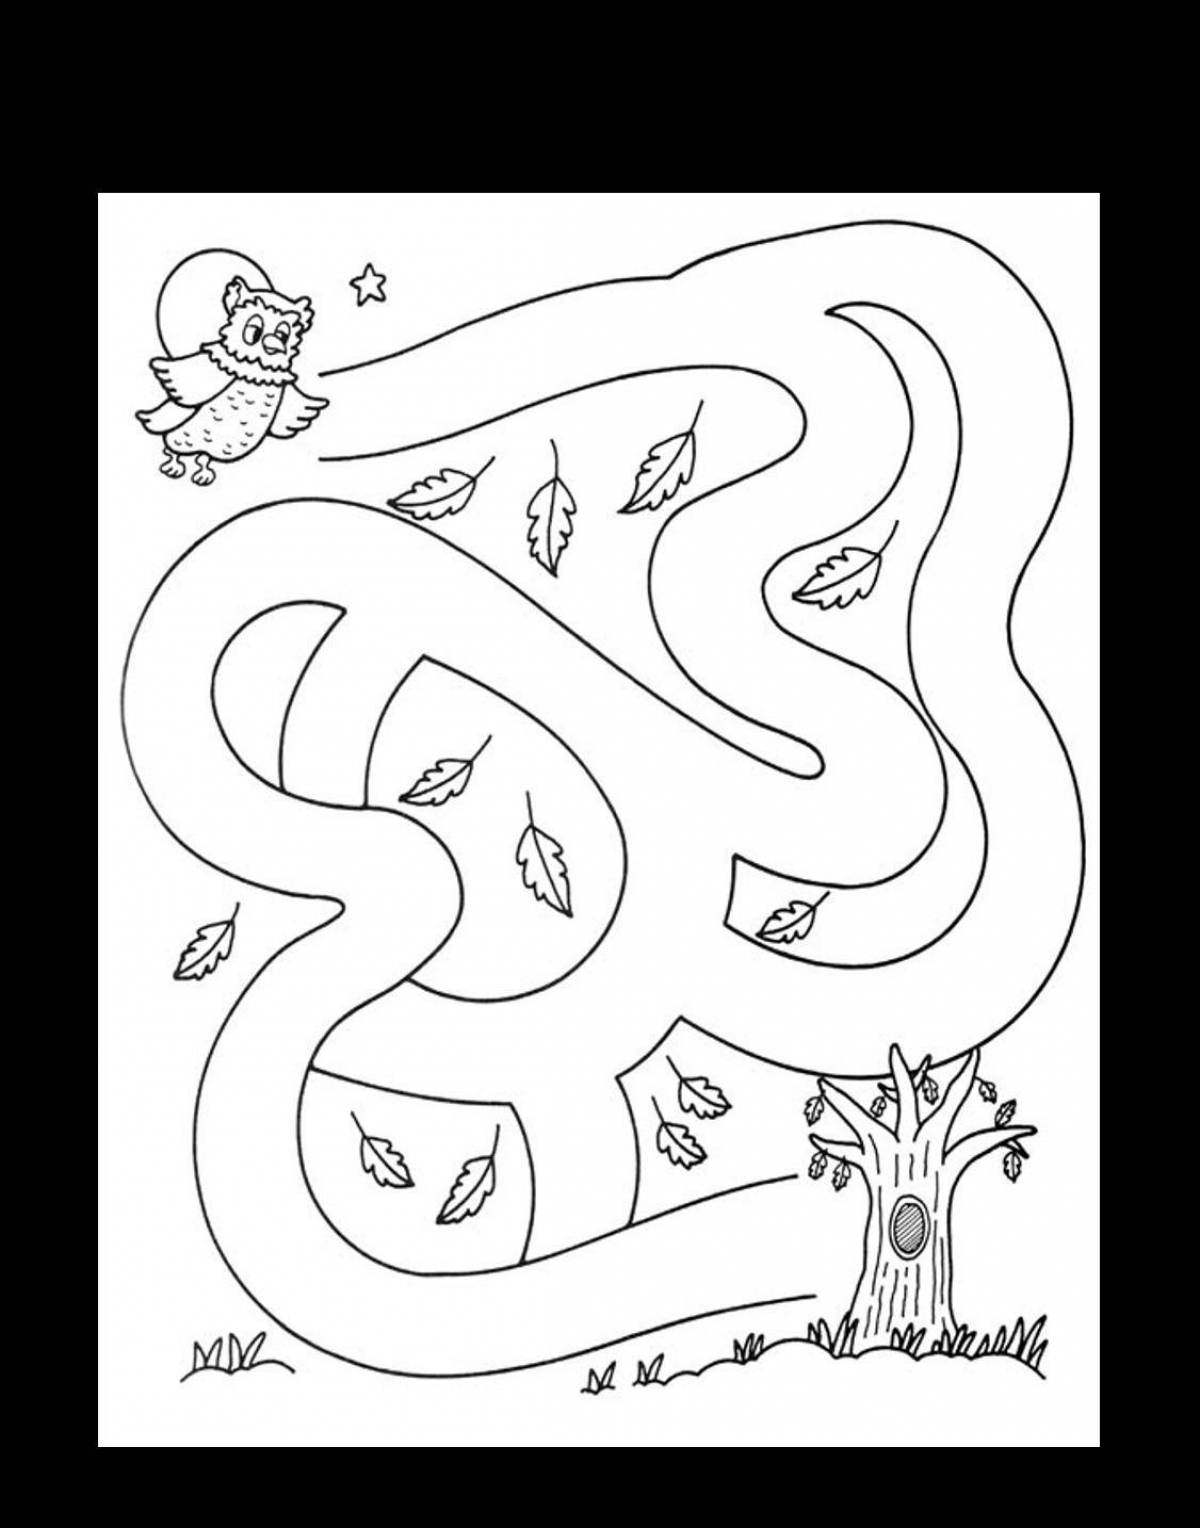 Coloring bright maze for children 3-4 years old